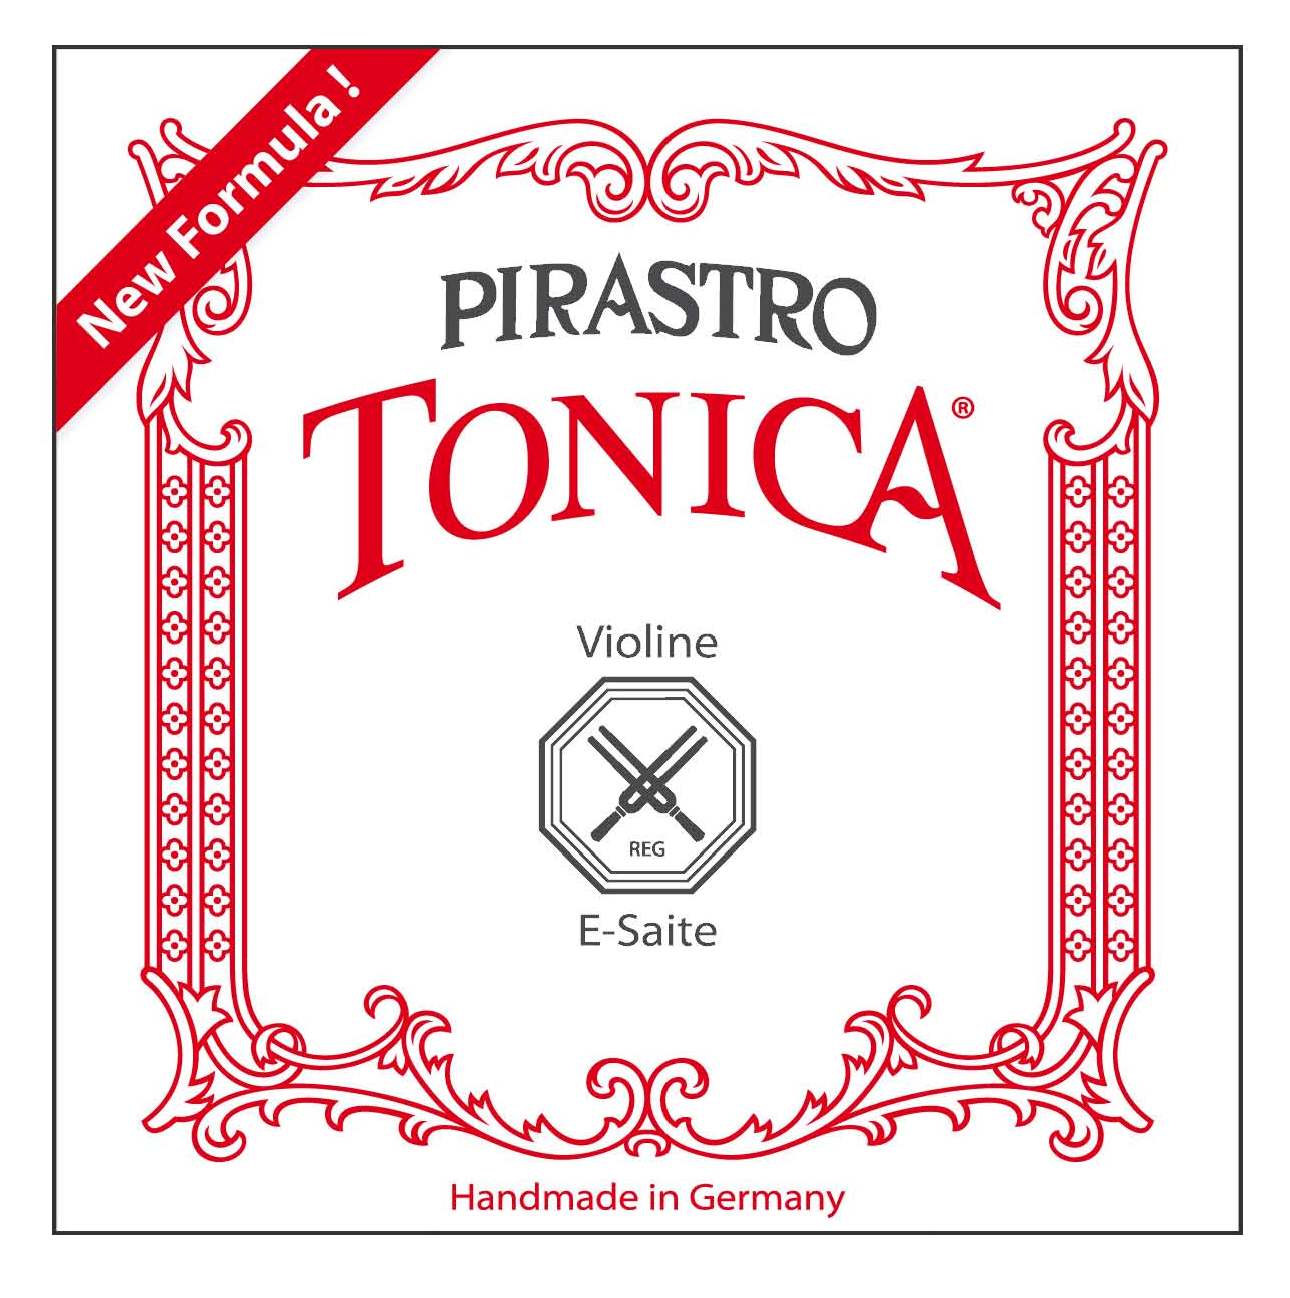 /Assets/product/images/Pirastro_Tonica_Violin_New.jpg